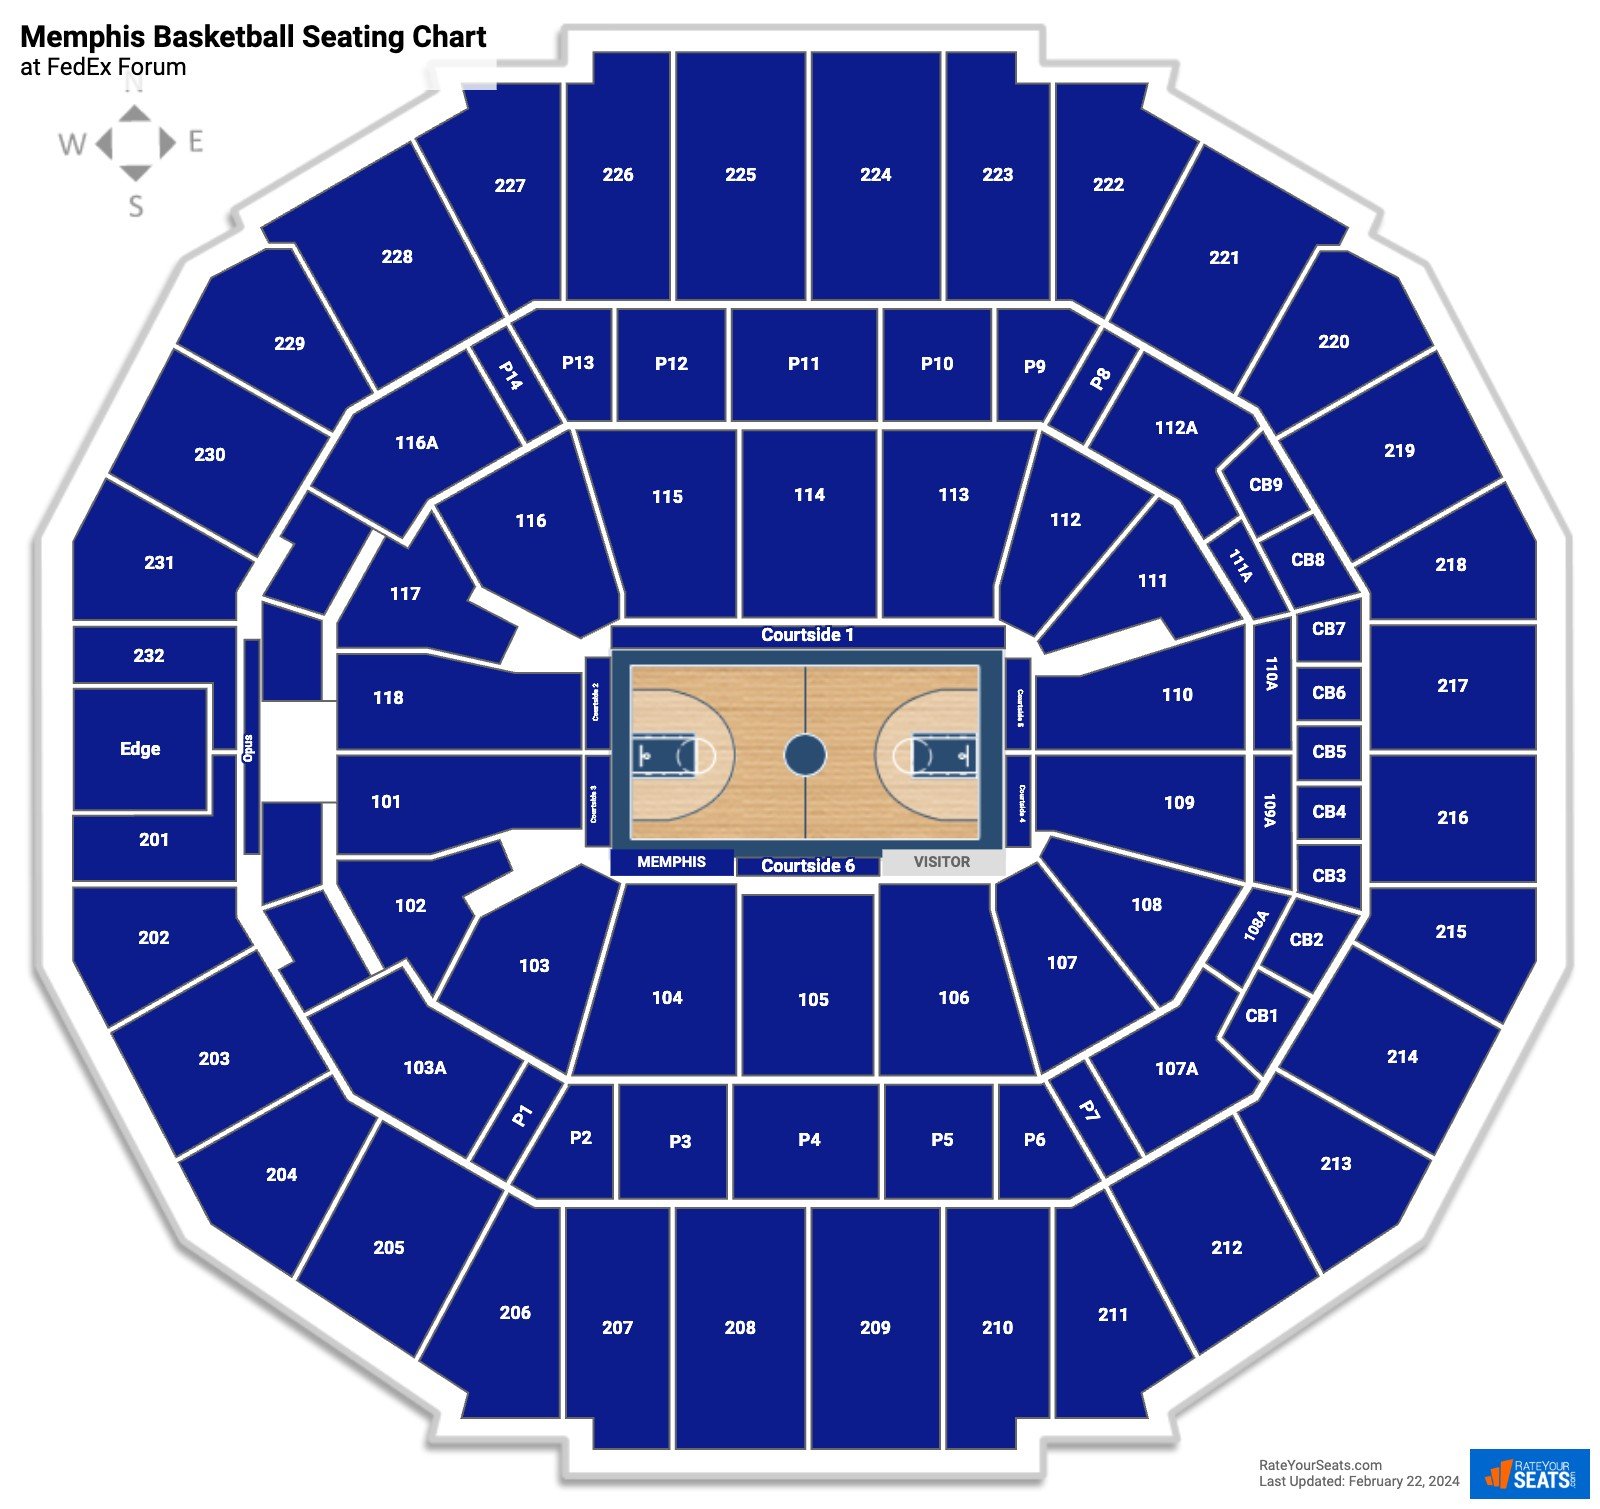 Memphis Tigers Seating Chart at FedEx Forum